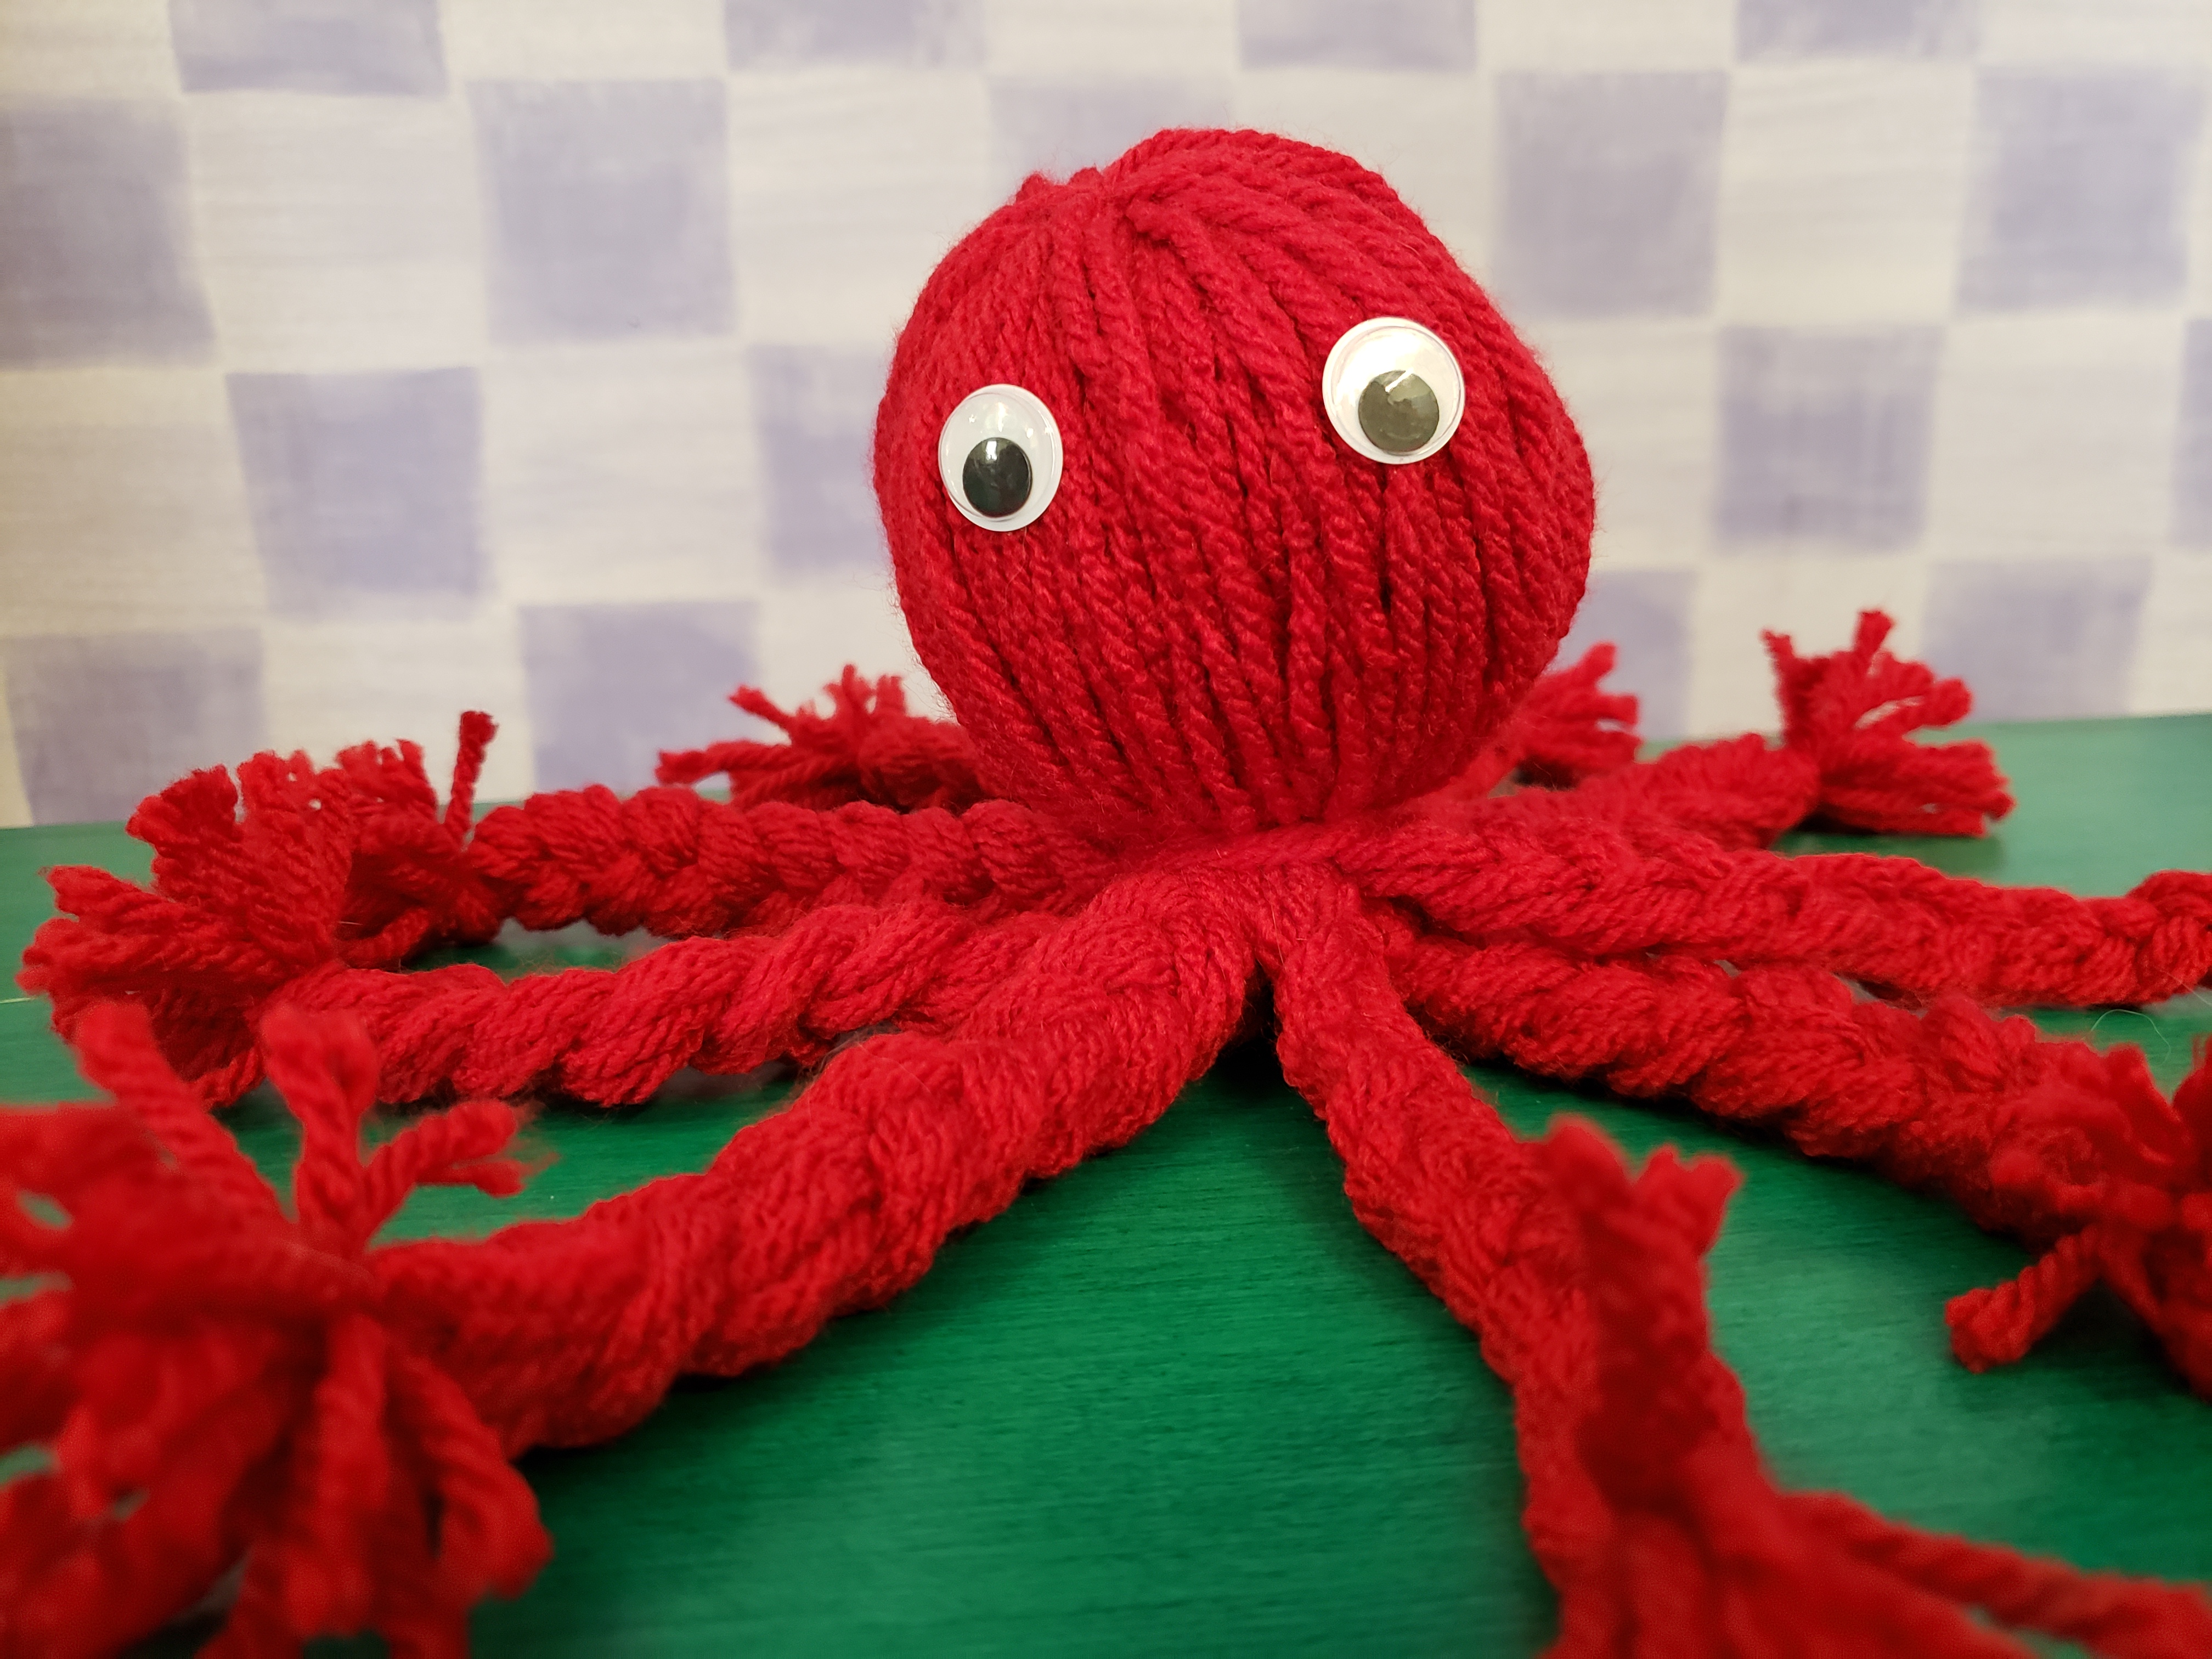 Image of red yarn octopus with braided legs